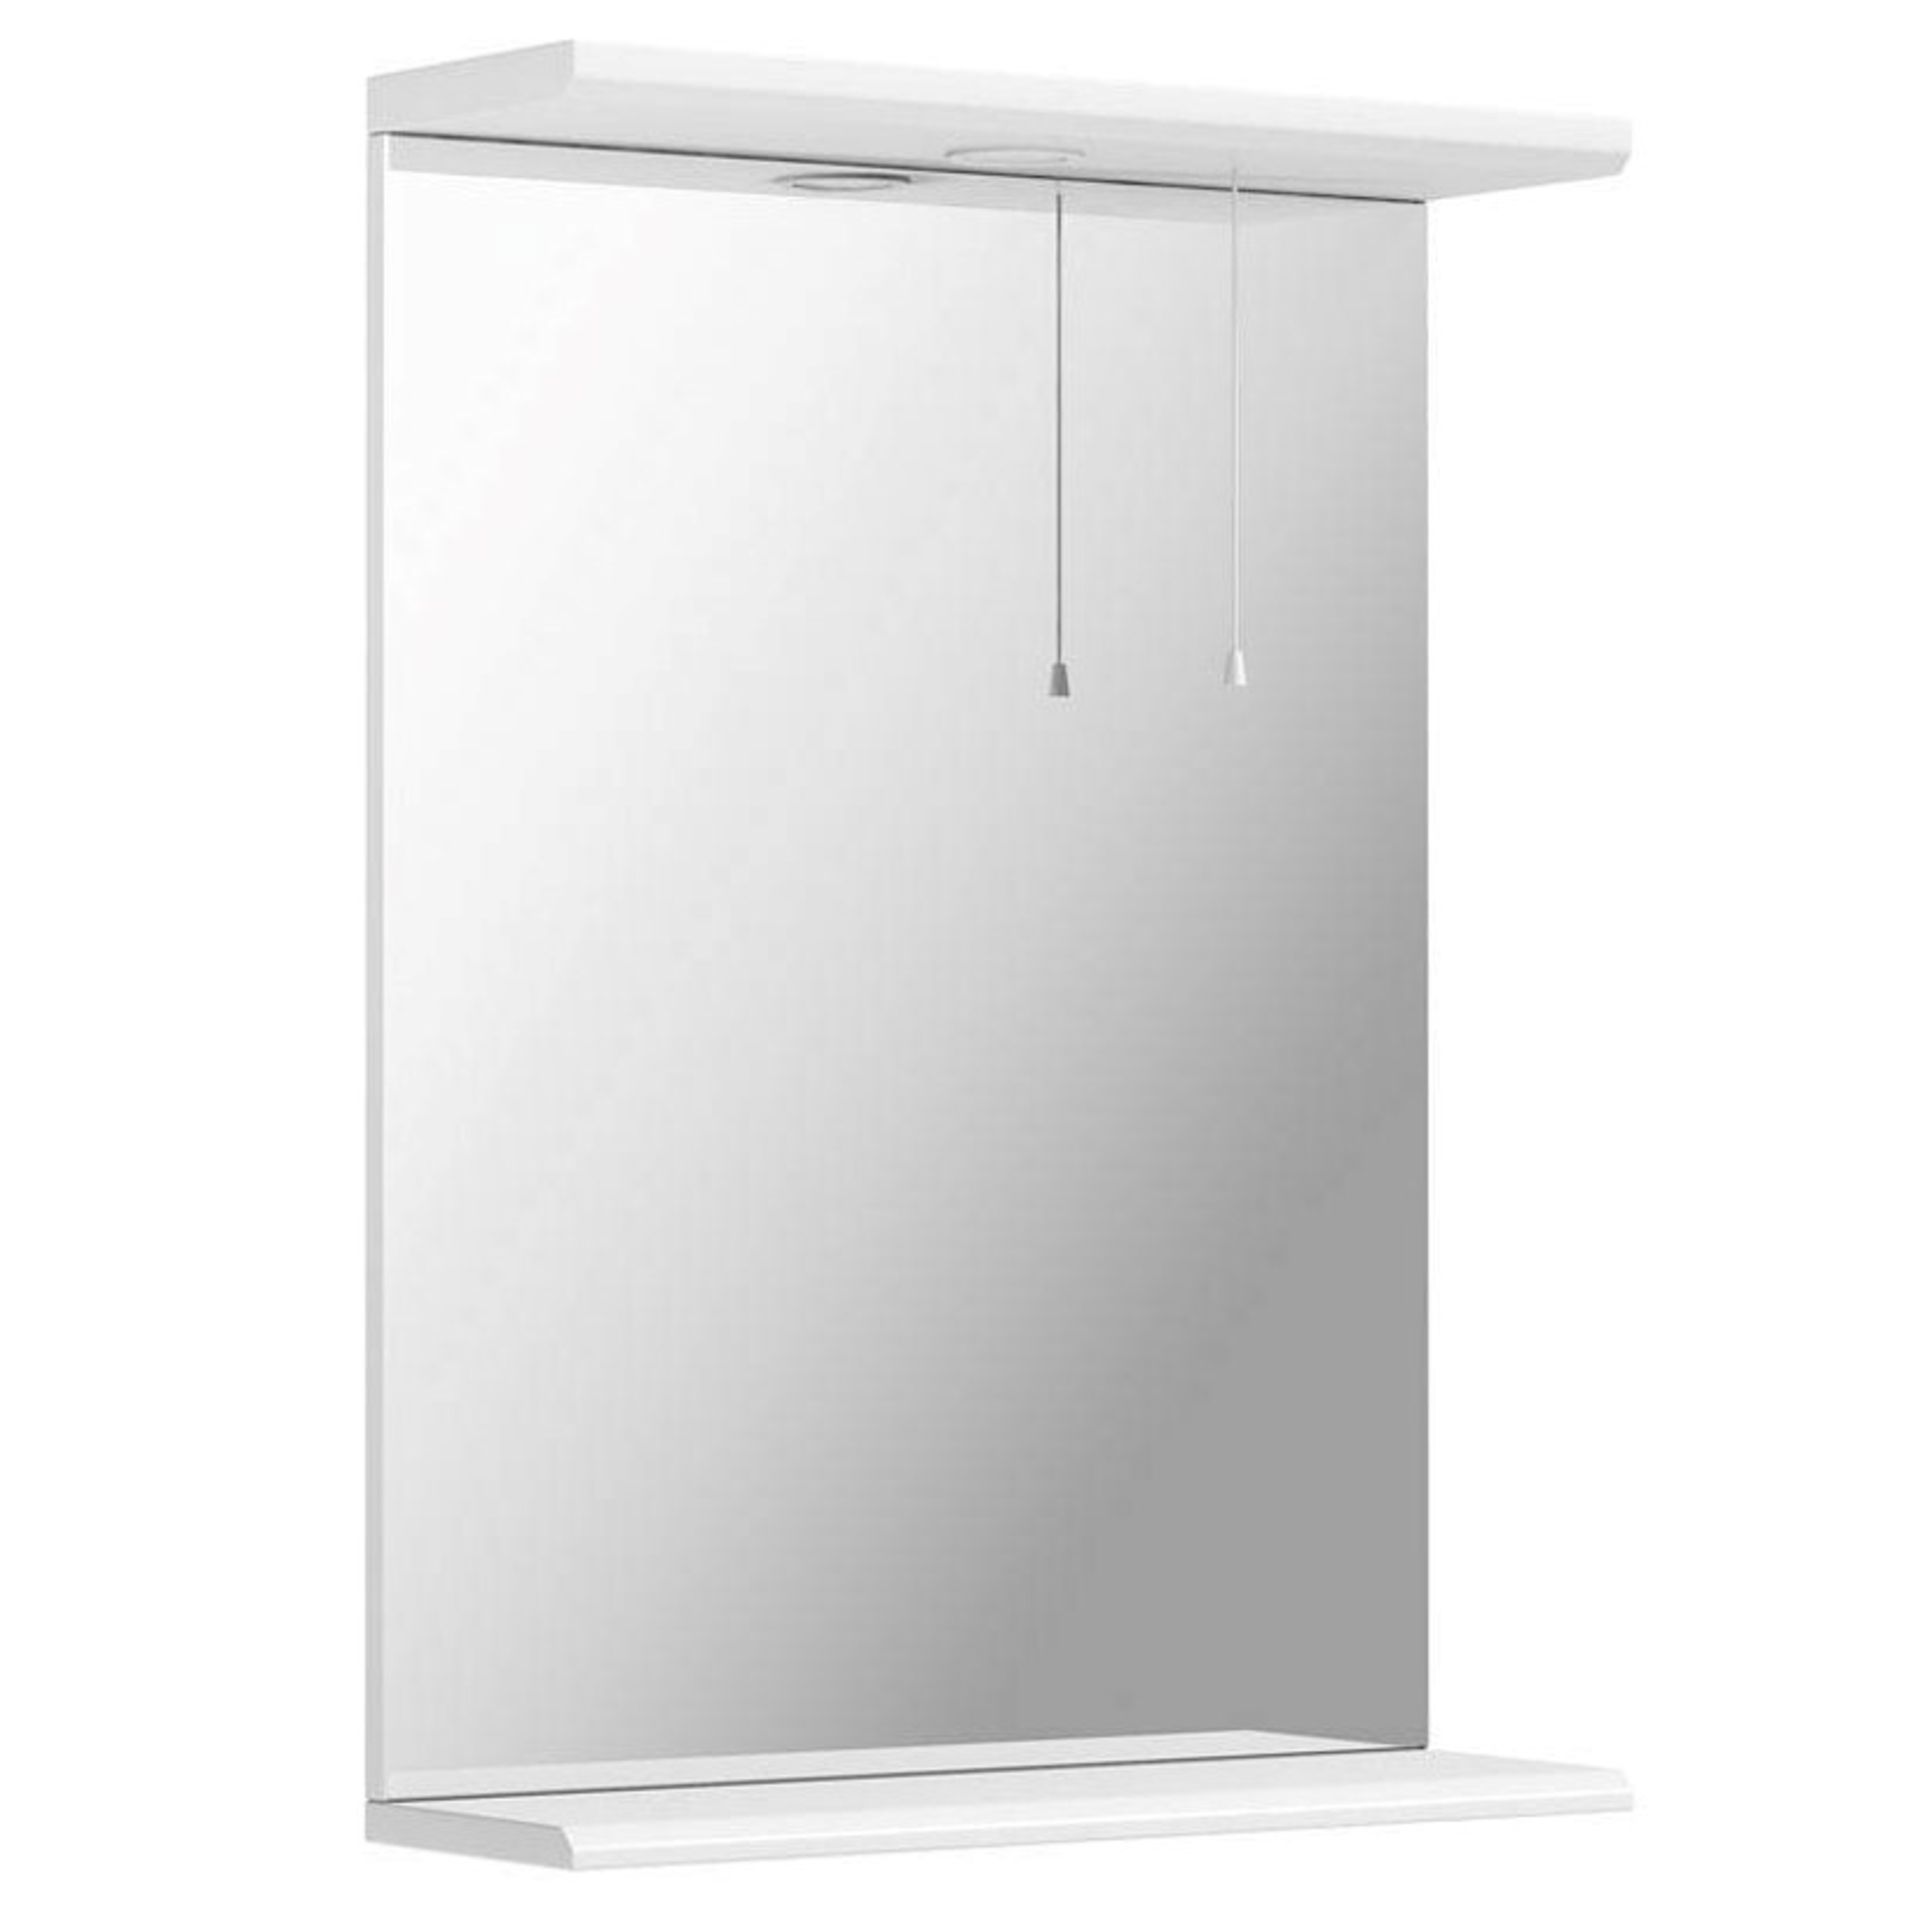 1 x Sienna White 550 Bathroom Mirror With Lights - Ref: DY157/LMW5501 - CL190 - Unused Stock - Locat - Image 4 of 8